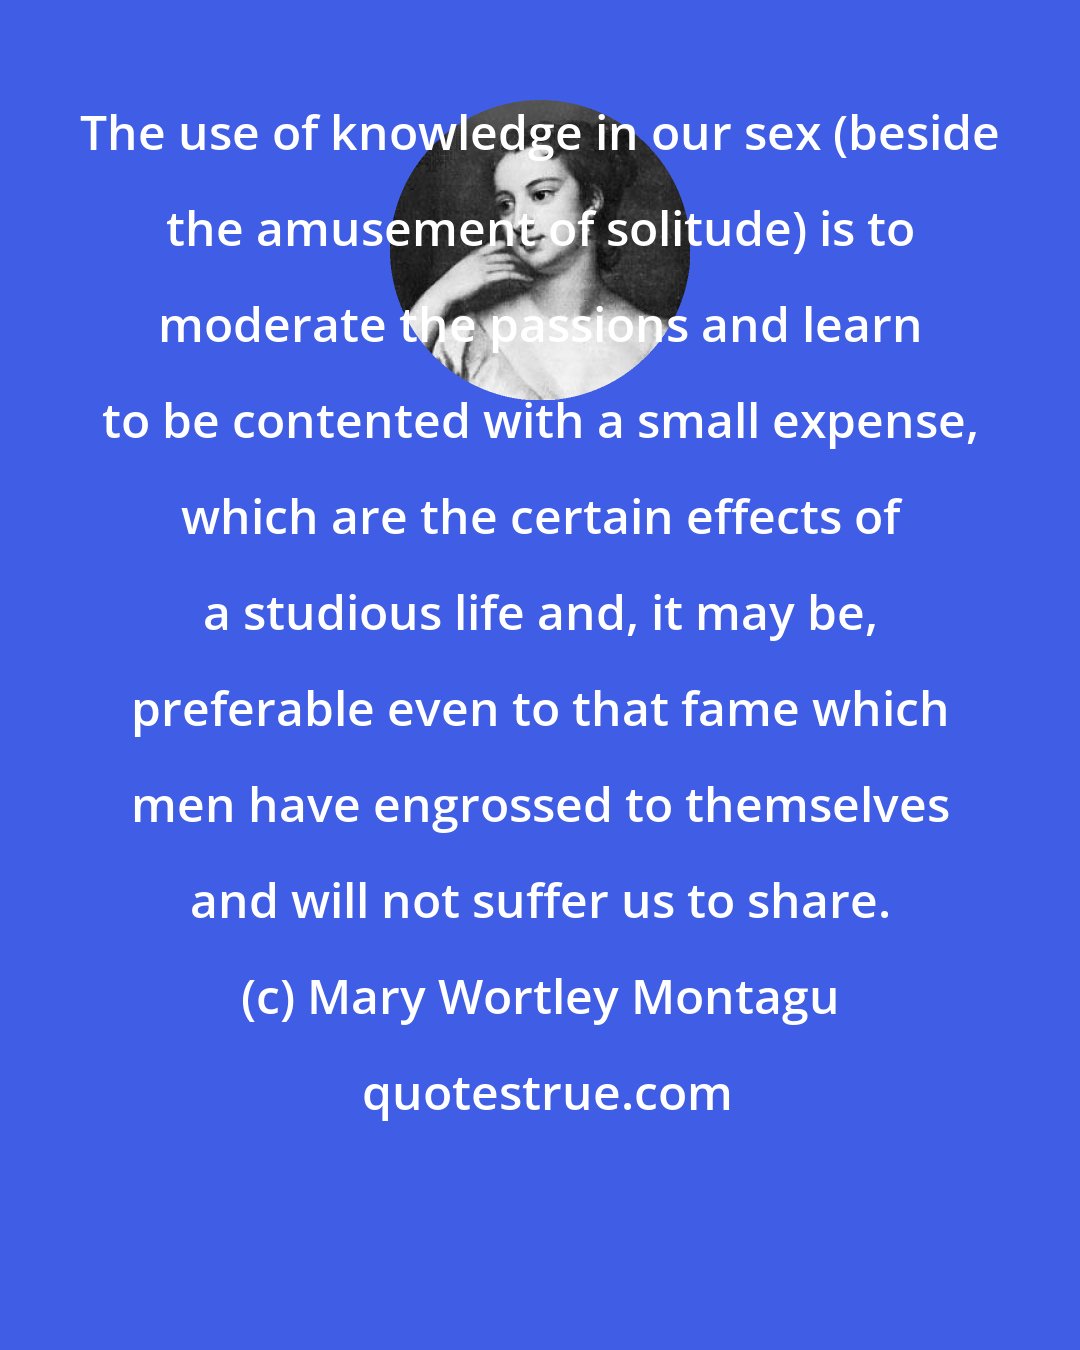 Mary Wortley Montagu: The use of knowledge in our sex (beside the amusement of solitude) is to moderate the passions and learn to be contented with a small expense, which are the certain effects of a studious life and, it may be, preferable even to that fame which men have engrossed to themselves and will not suffer us to share.